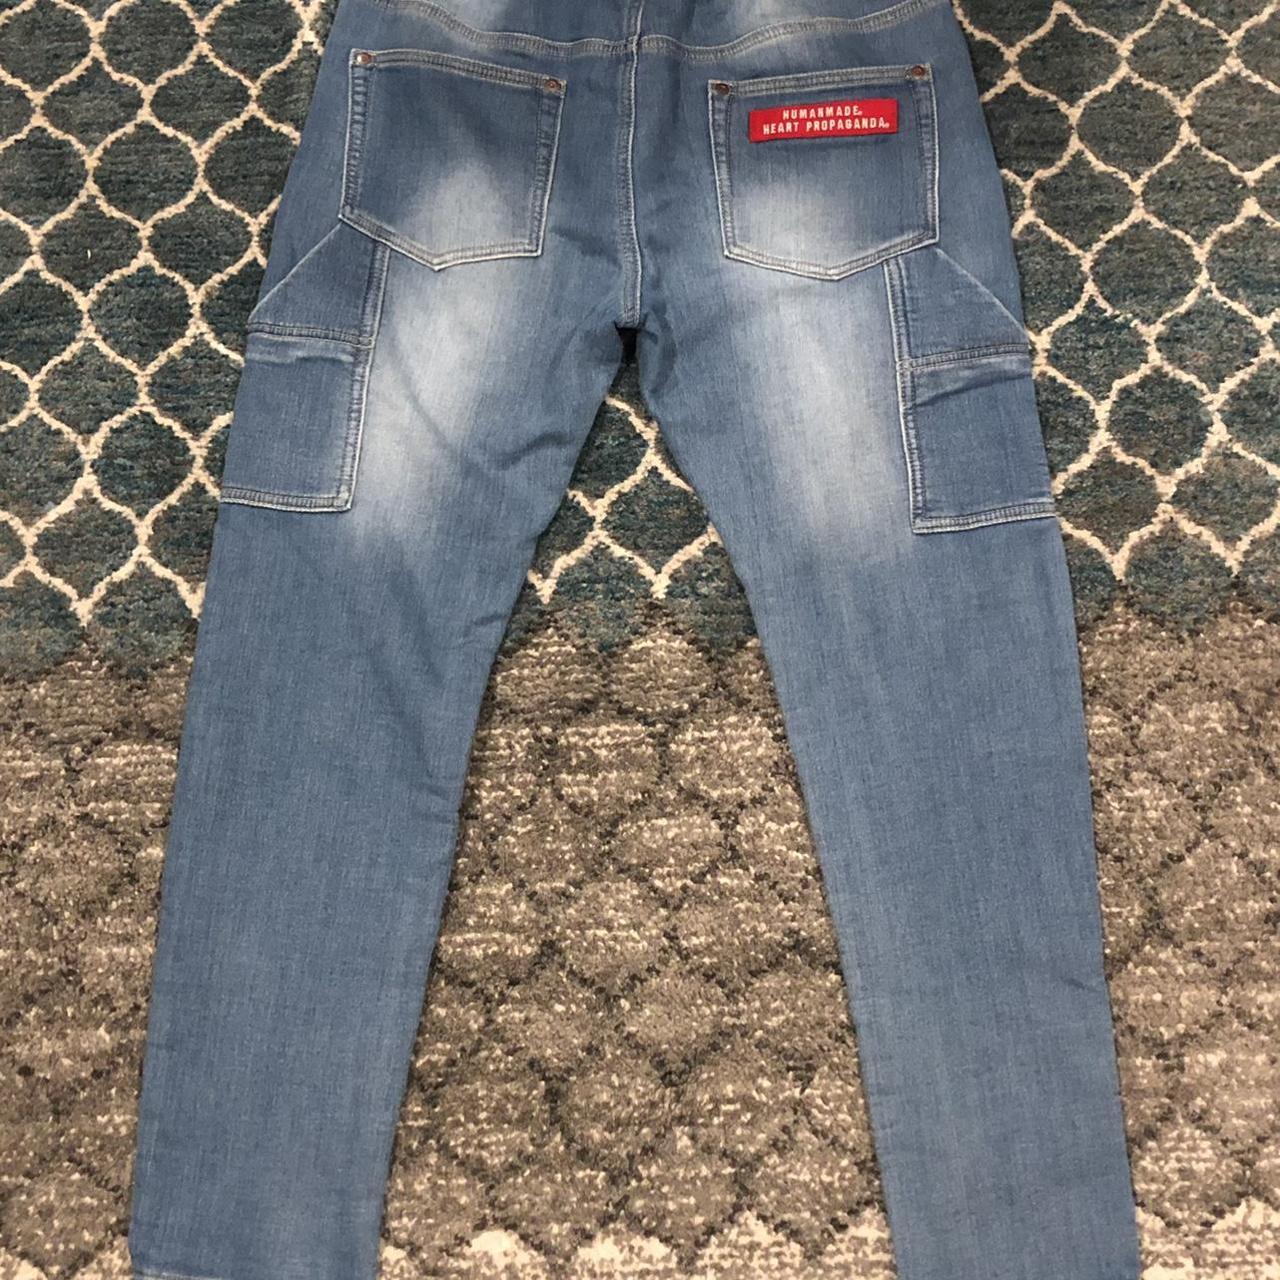 Product Image 2 - •Human Made “Relax Denims” Pants
•In